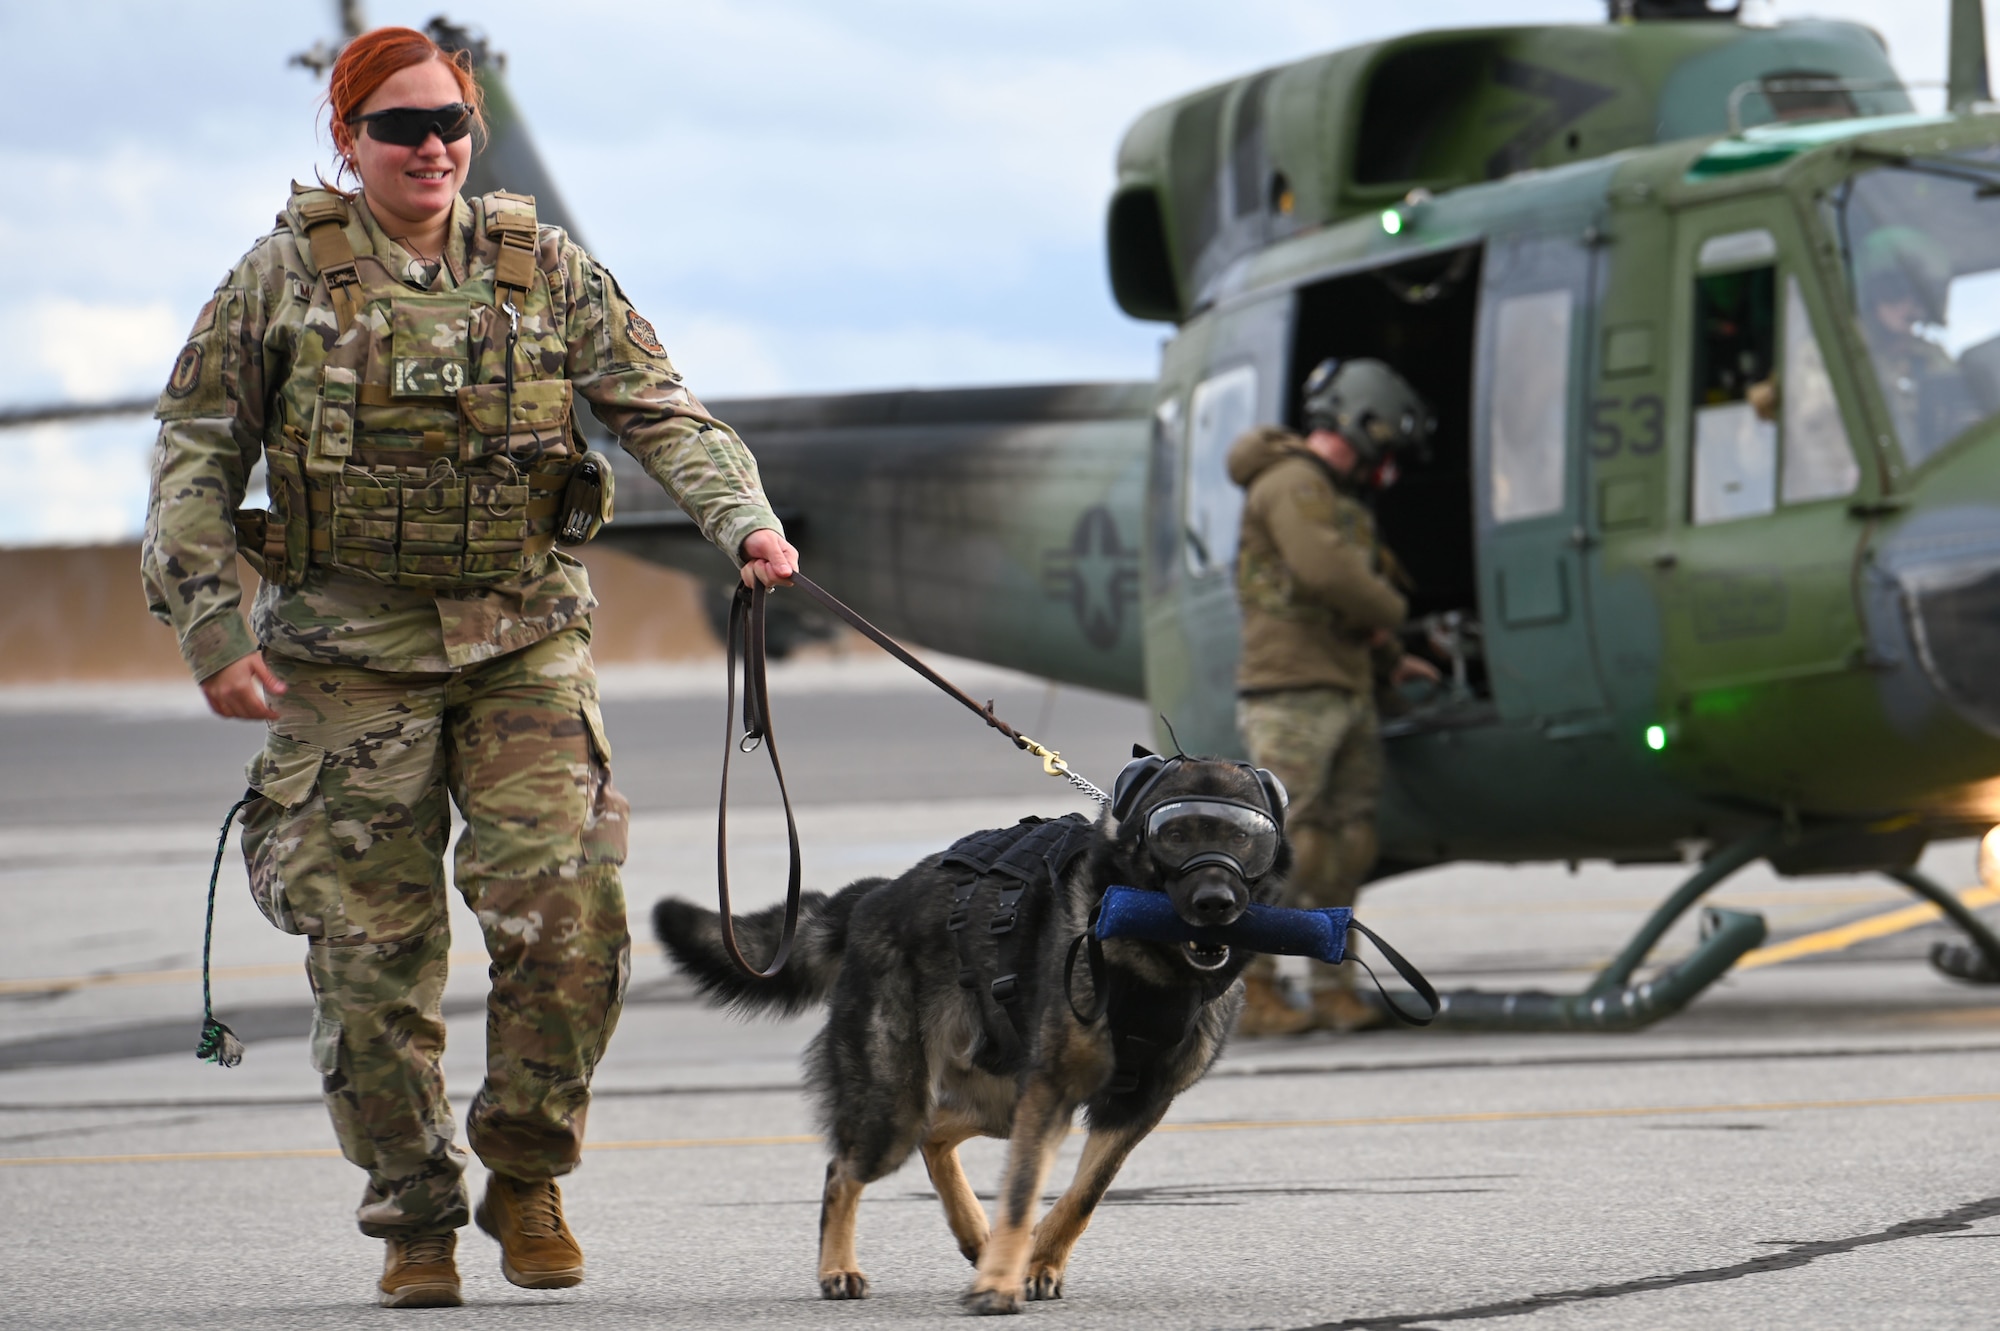 Tech. Sgt. Crystal Maldonado, 92nd Security Forces Squadron Military Working Dog handler, and her dog Leo return from UH-1N Huey training Oct. 25, 2022 at Fairchild Air Force Base, Washington. Three Military Working Dogs were trained how to properly board and ride in a helicopter to ensure safety on future missions. (U.S. Air Force photo by Airman 1st Class Morgan Dailey)